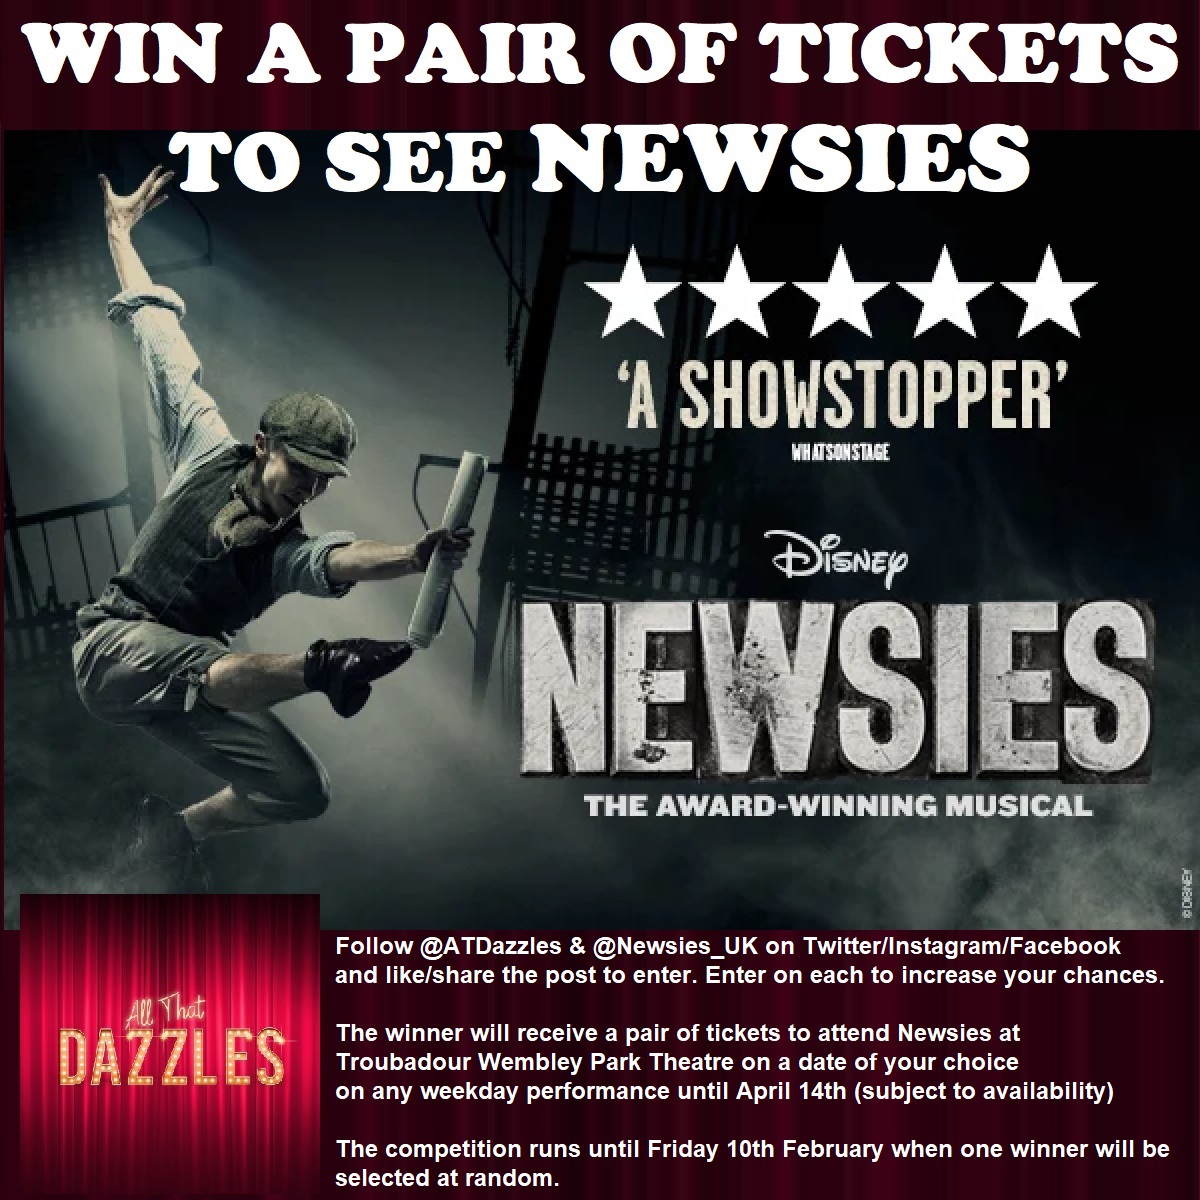 BREAKING NEWS - NEW GIVEAWAY ALERT I've teamed up with @newsies_uk to offer one lucky person a pair of tickets to see the show at a date of your choice. To enter simply like or retweet this post. You must be following me to enter The winner will be randomly picked on 10 February.